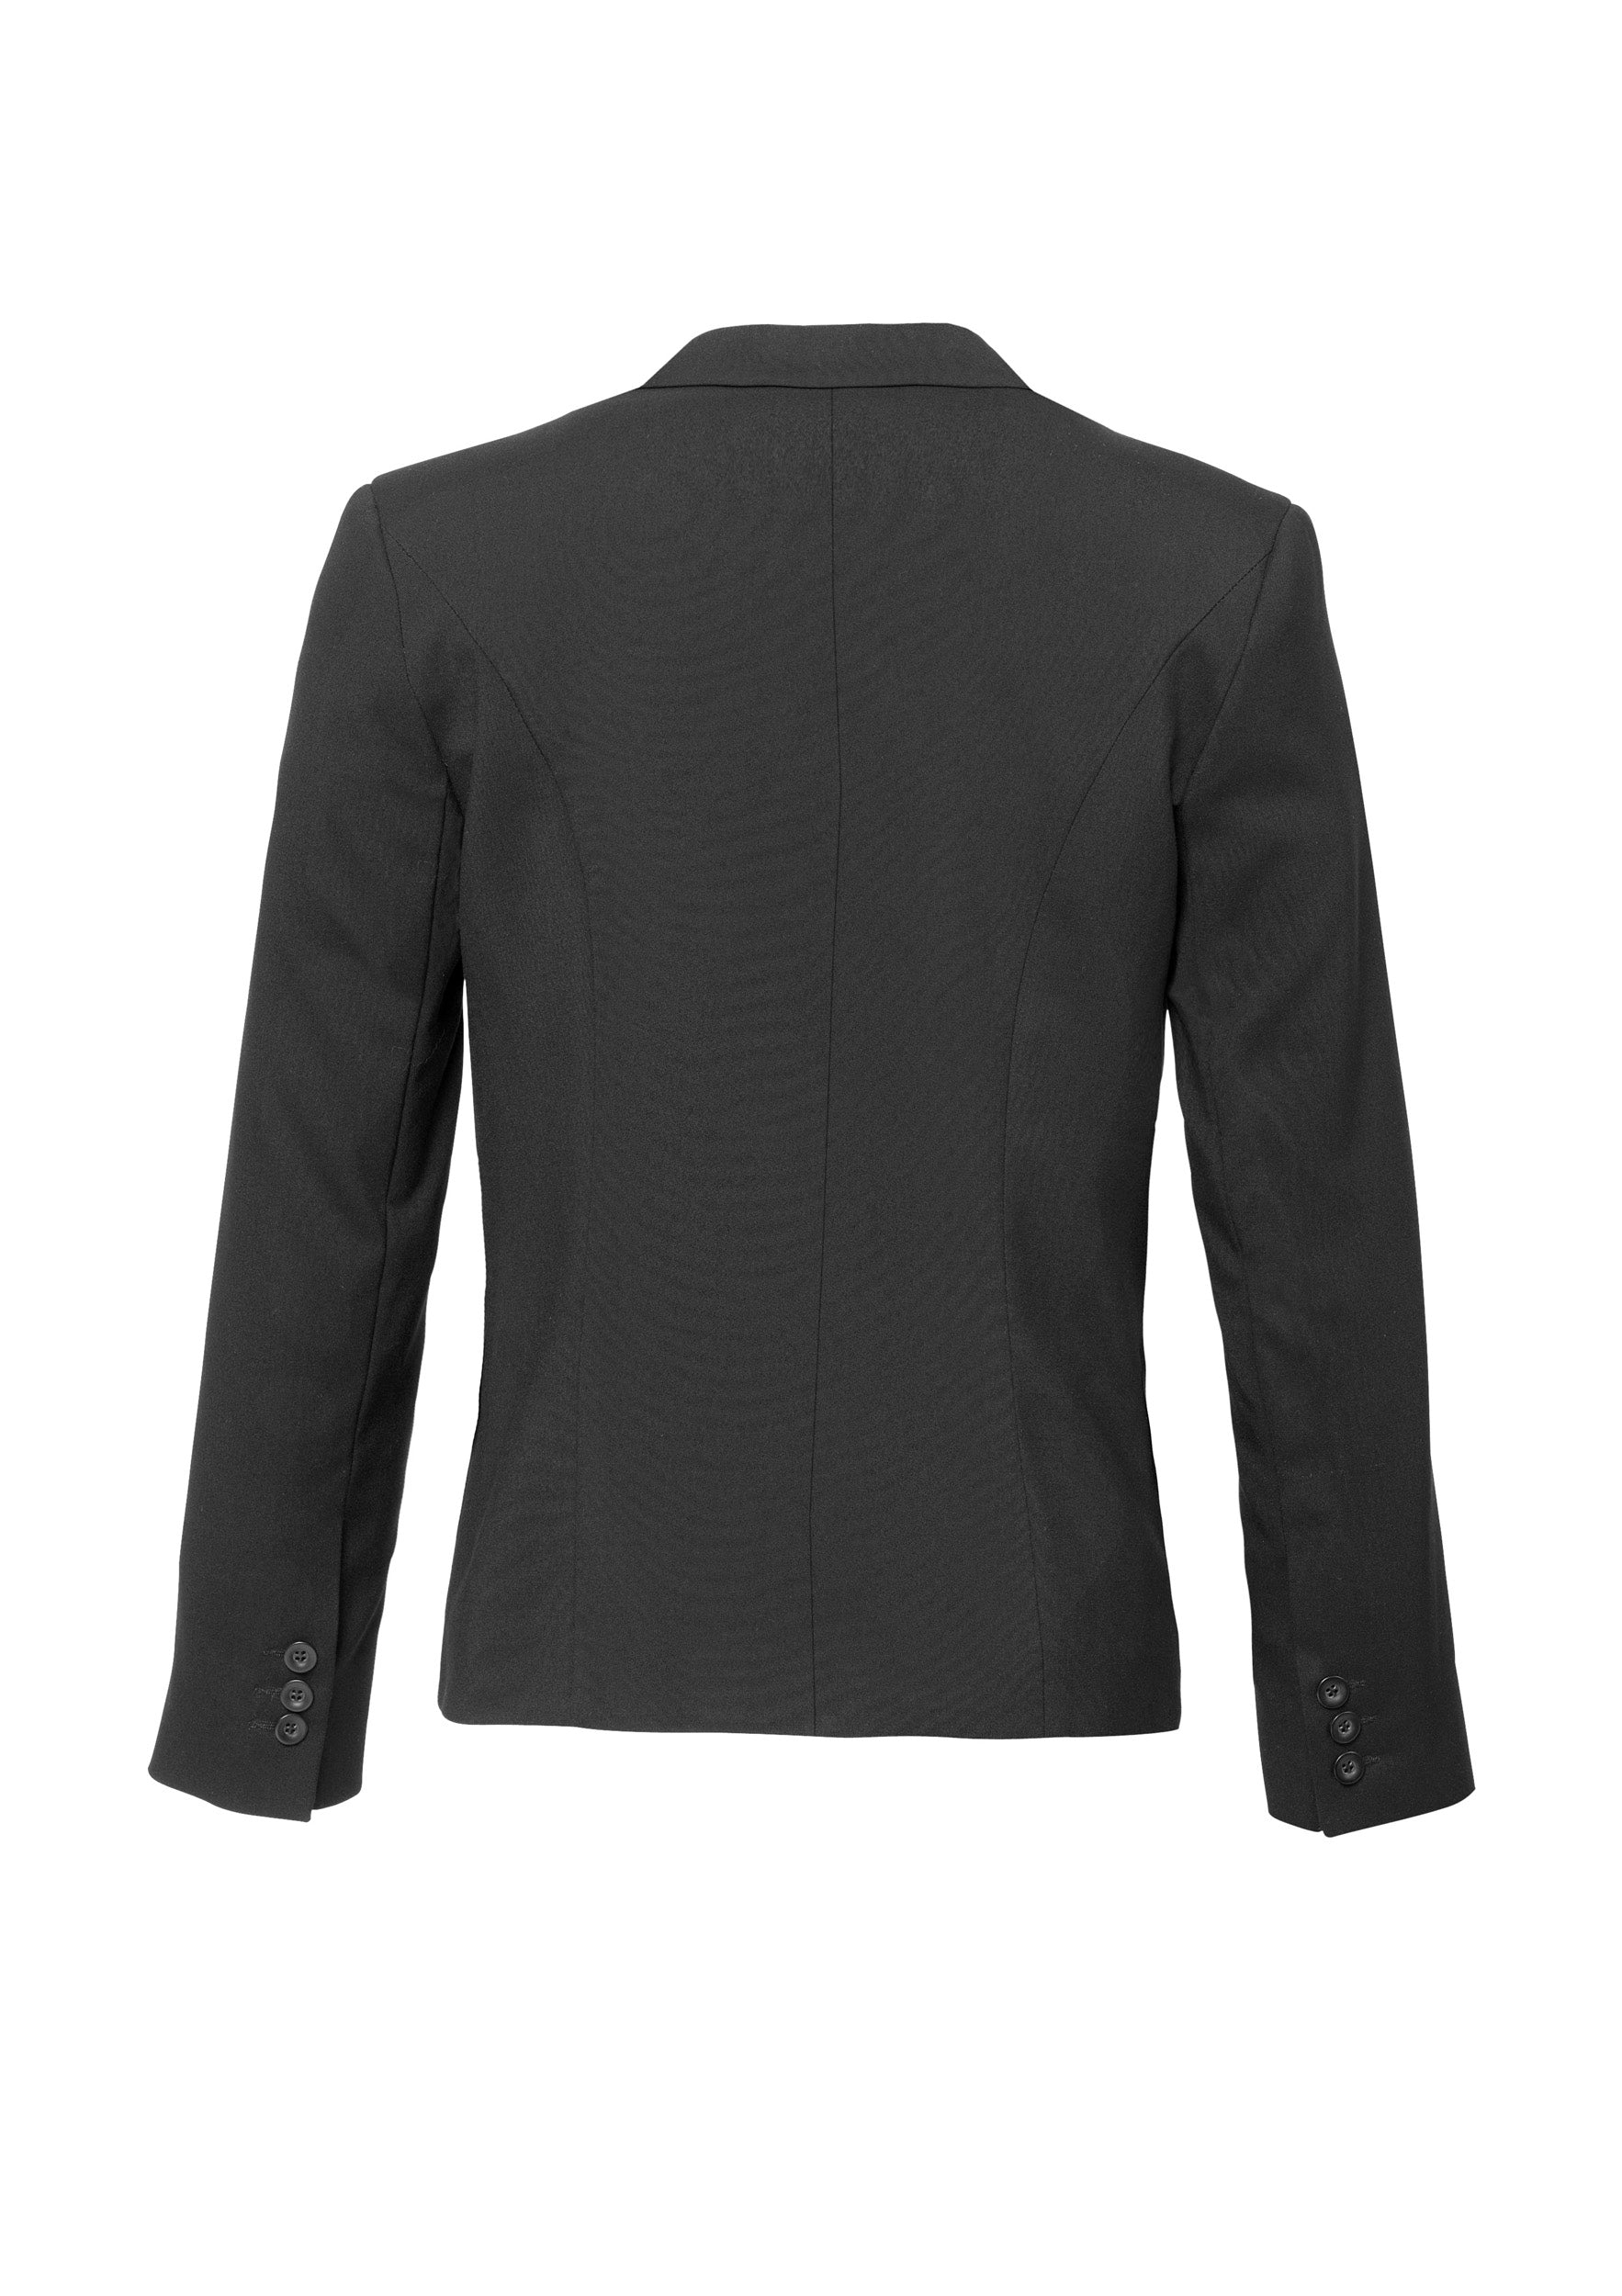 Womens Comfort Wool Stretch Short Jacket with Reverse Lapel